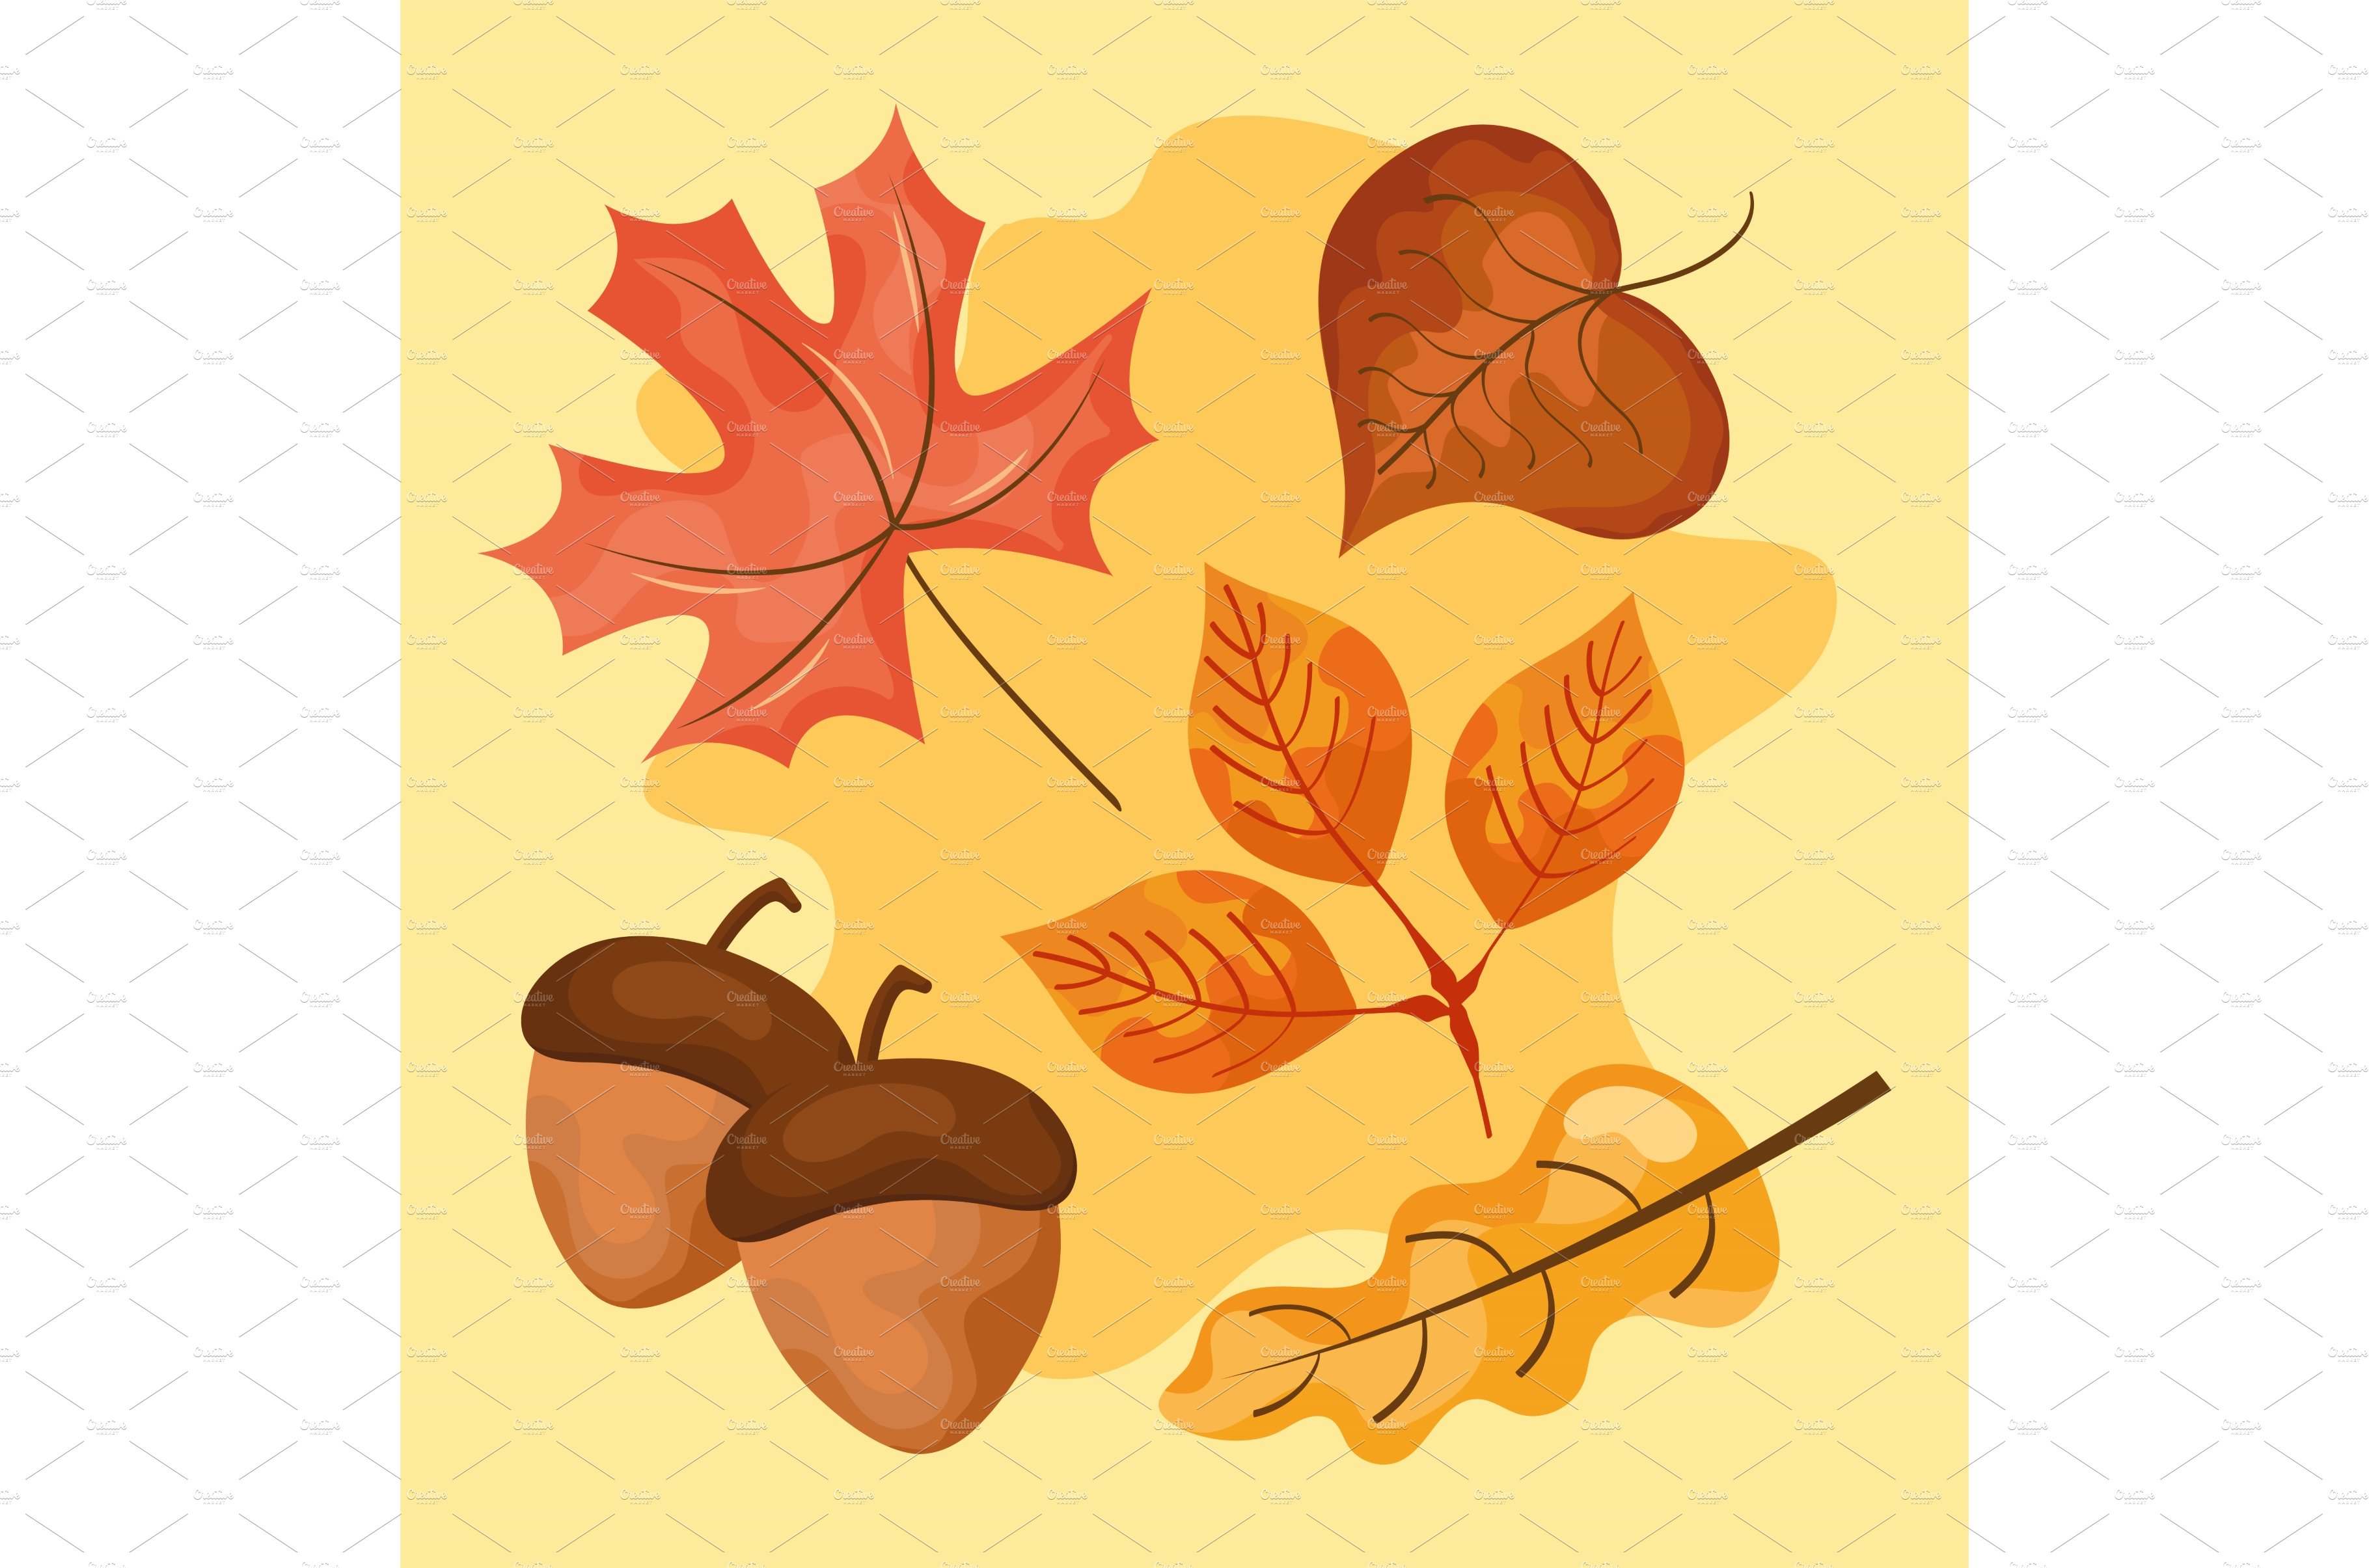 Autumn Leaves, Autumn Art, Autumn Material, Autumn Leaves Drawing Free PNG  And Clipart Image For Free Download - Lovepik | 401523239